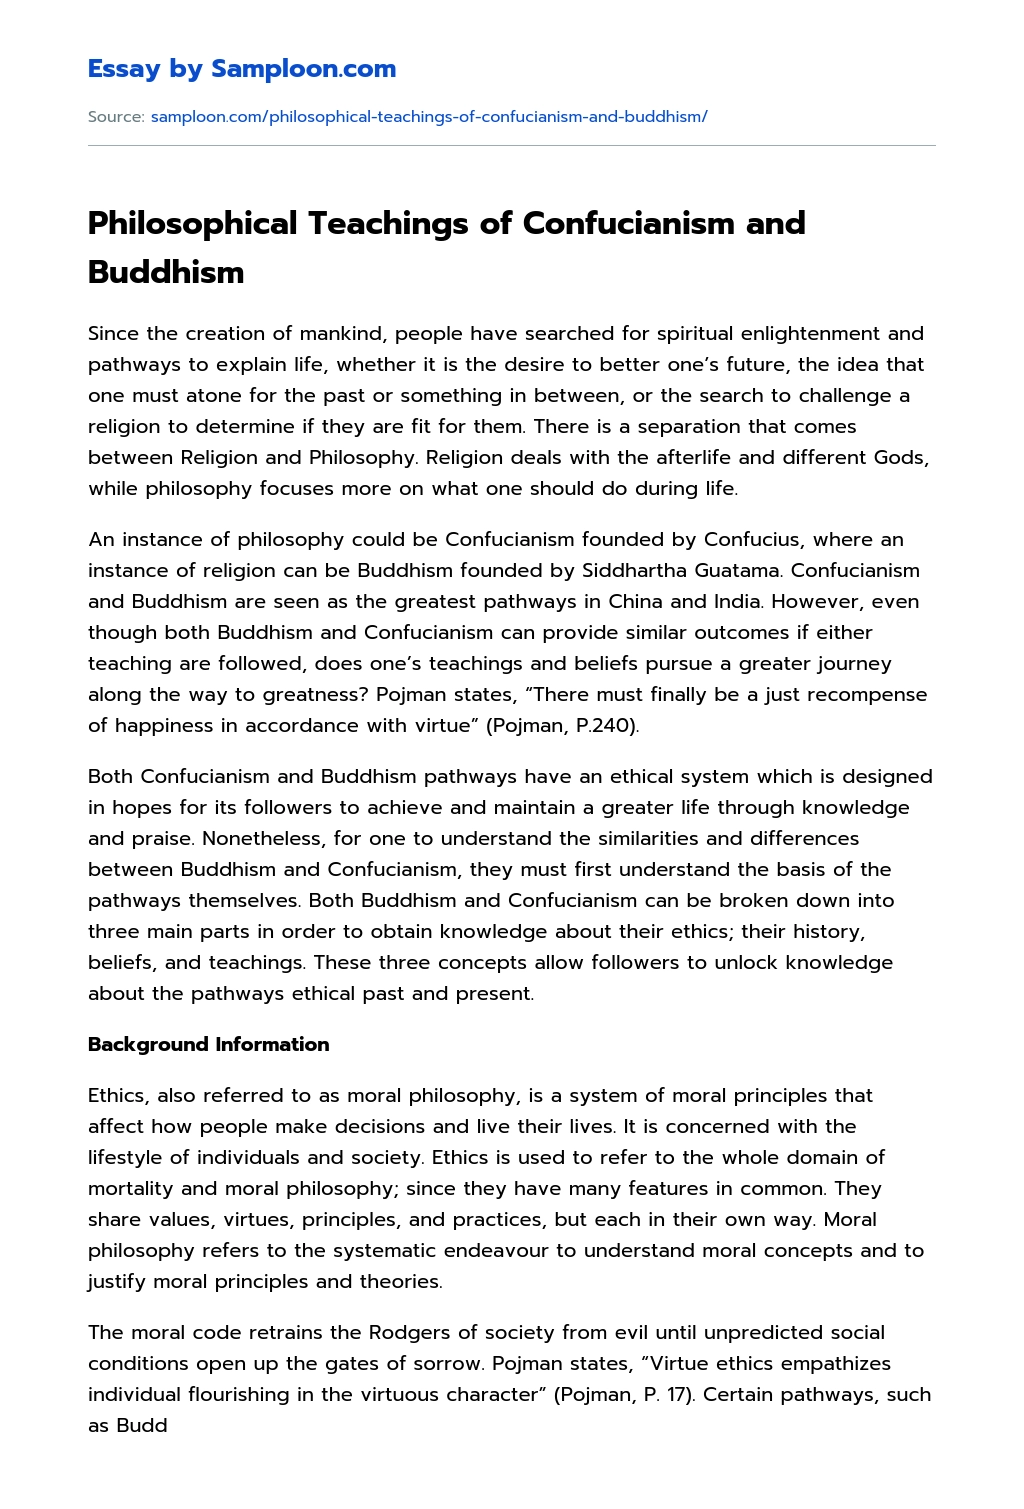 Philosophical Teachings of Confucianism and Buddhism essay